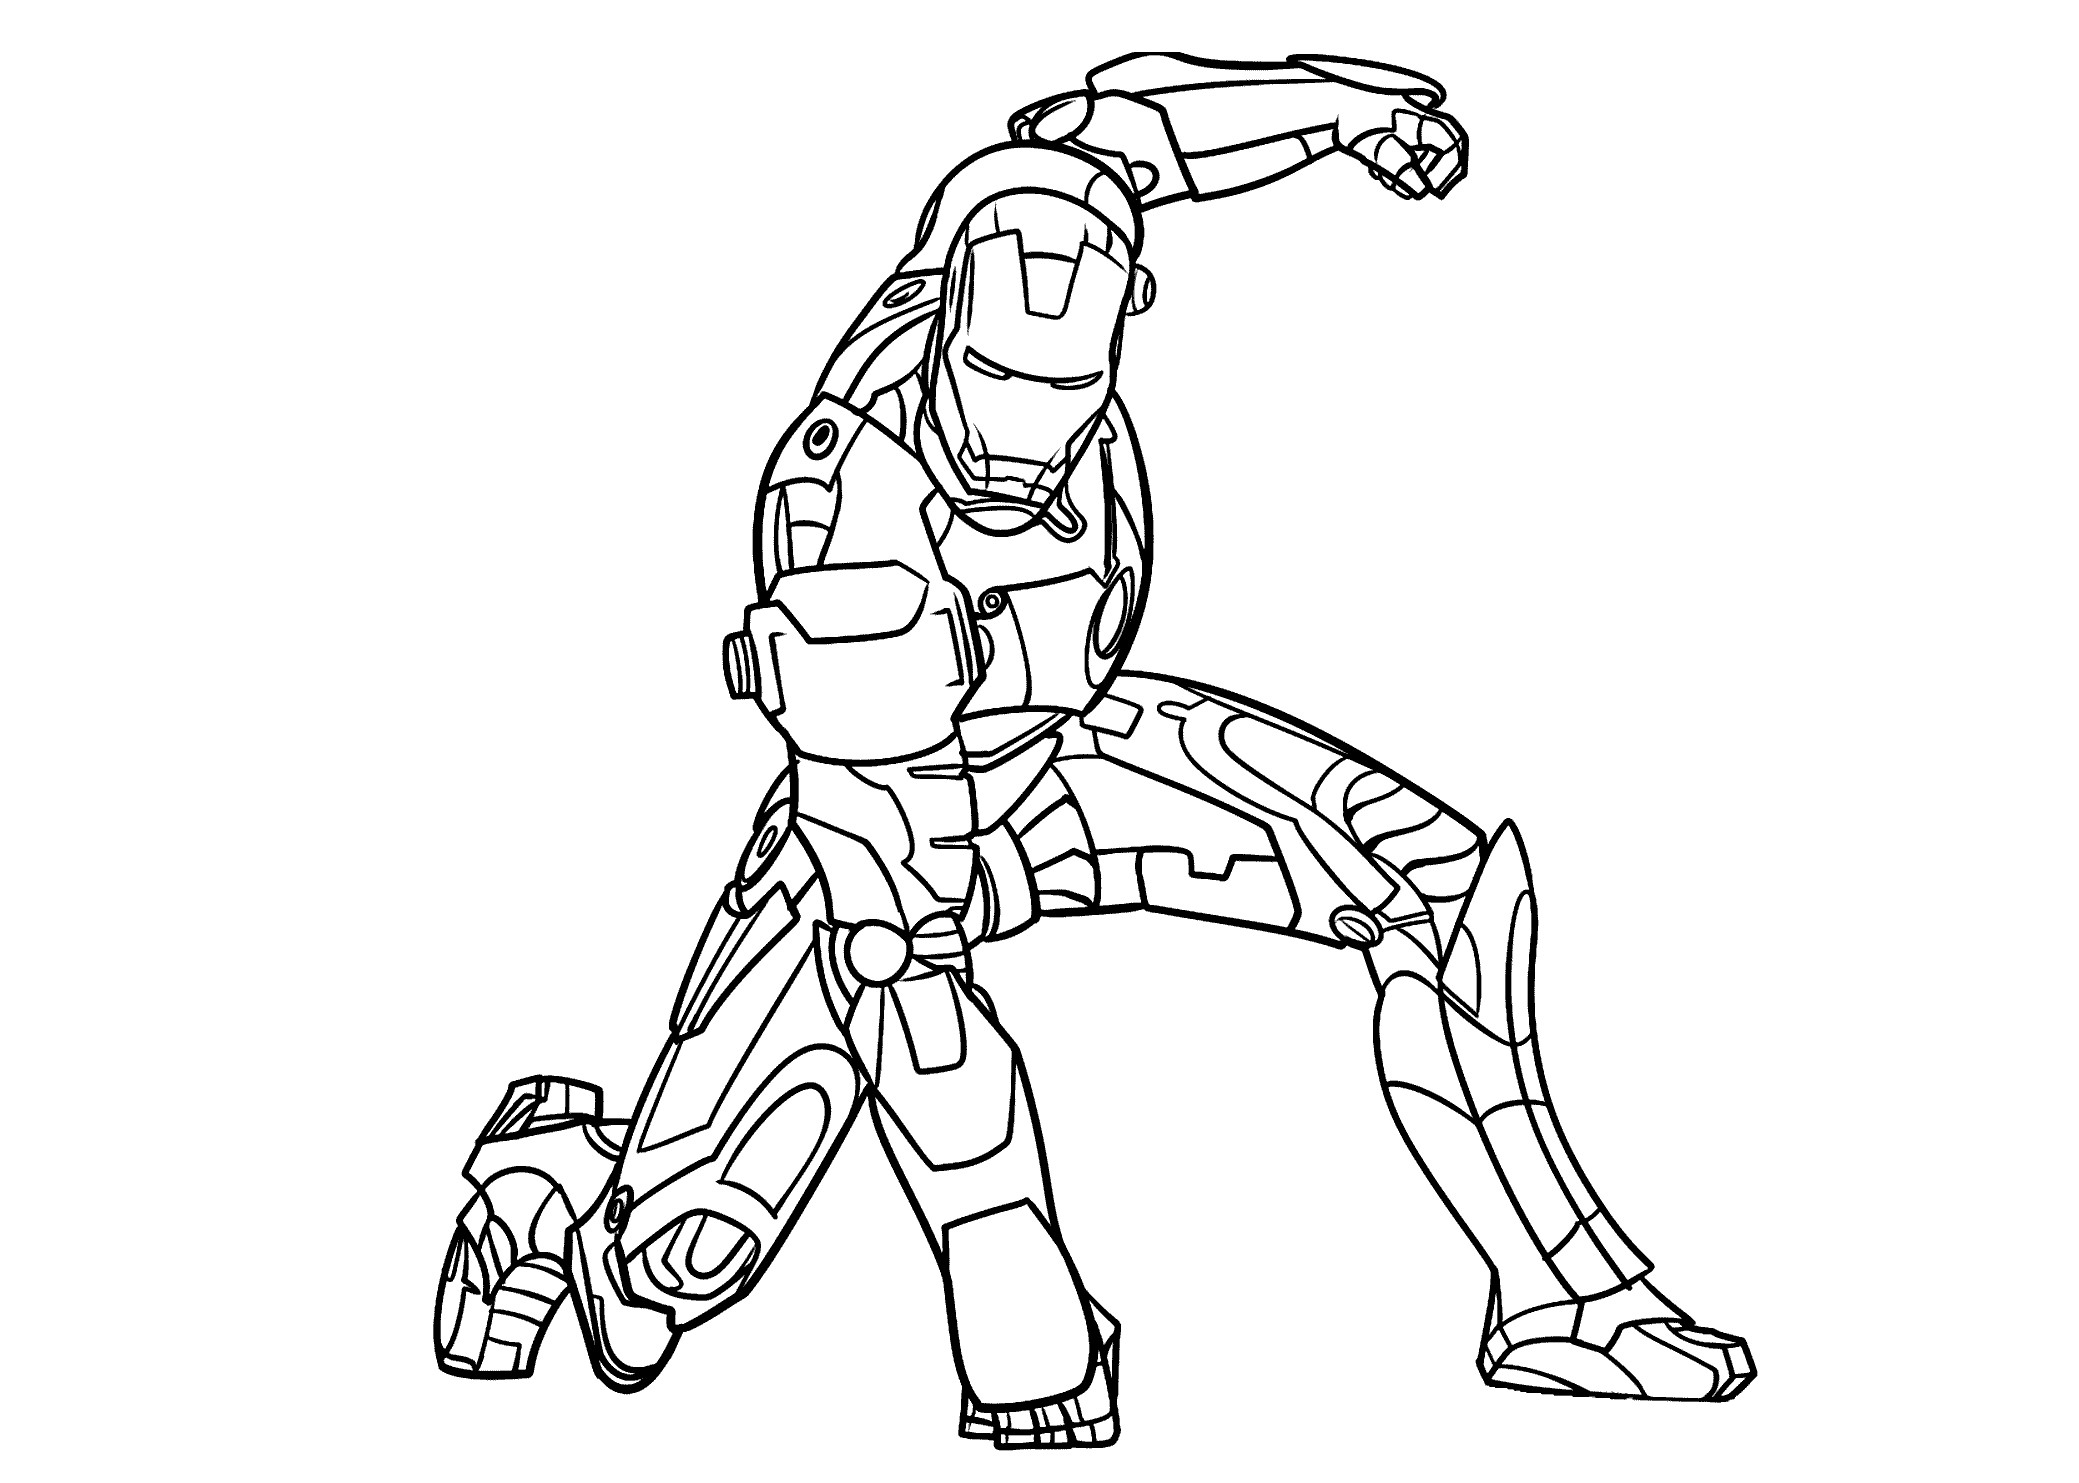 Ironman Coloring Pages
 Iron Man Coloring Pages coloringsuite